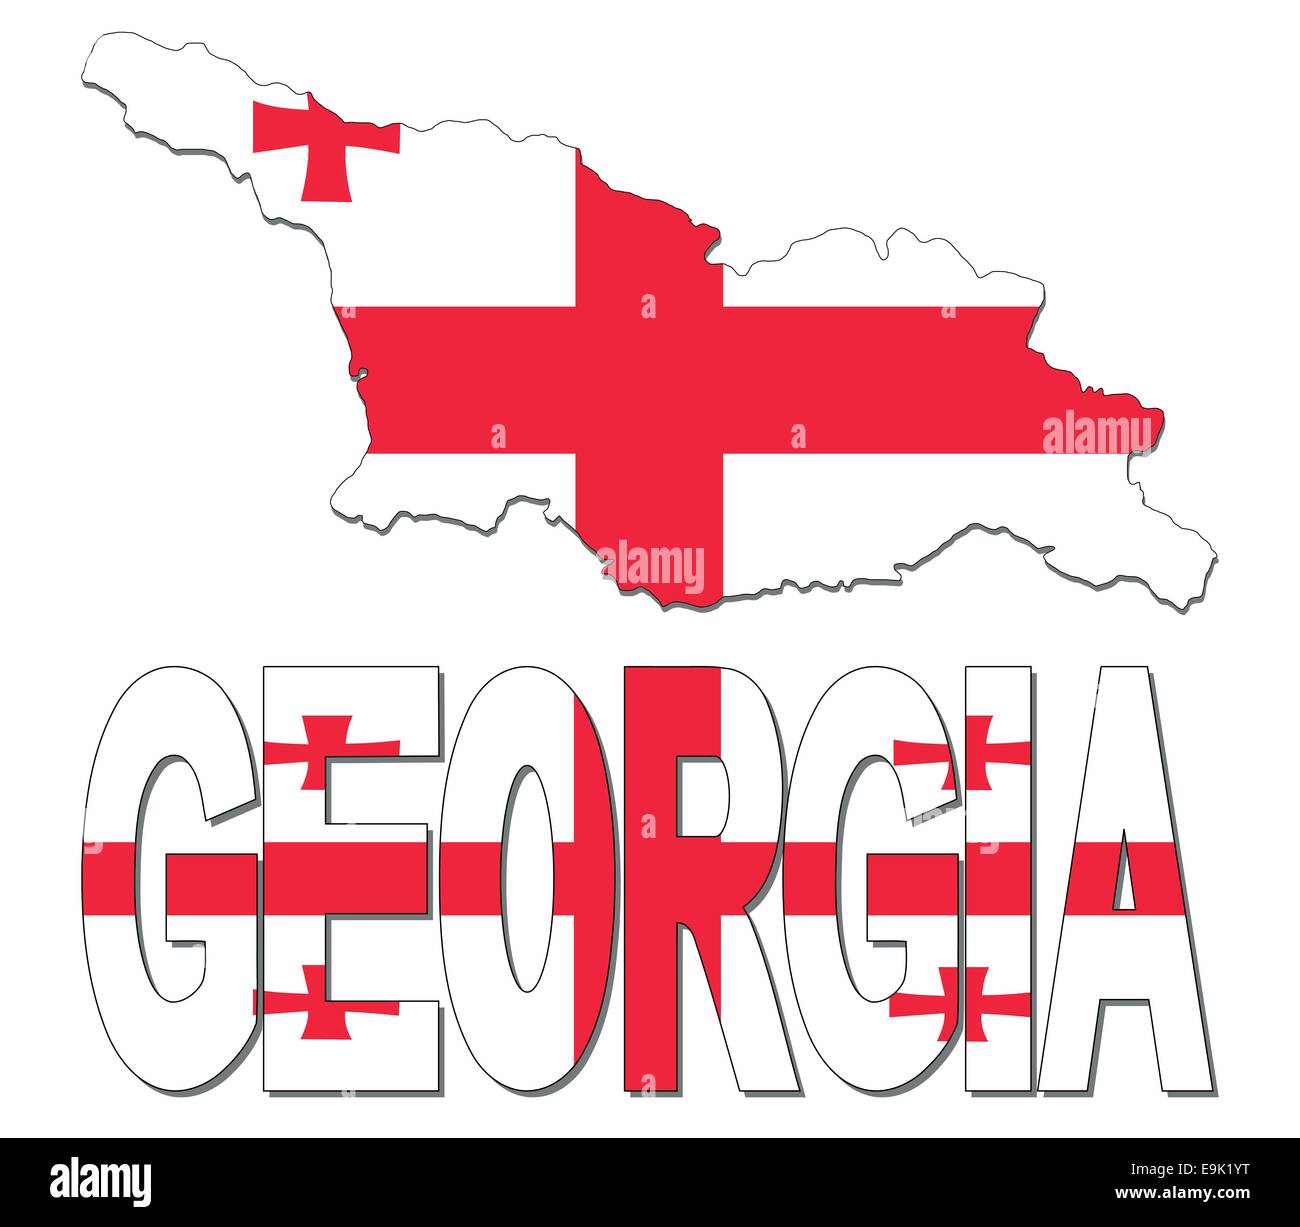 Georgia map flag and text illustration Stock Vector